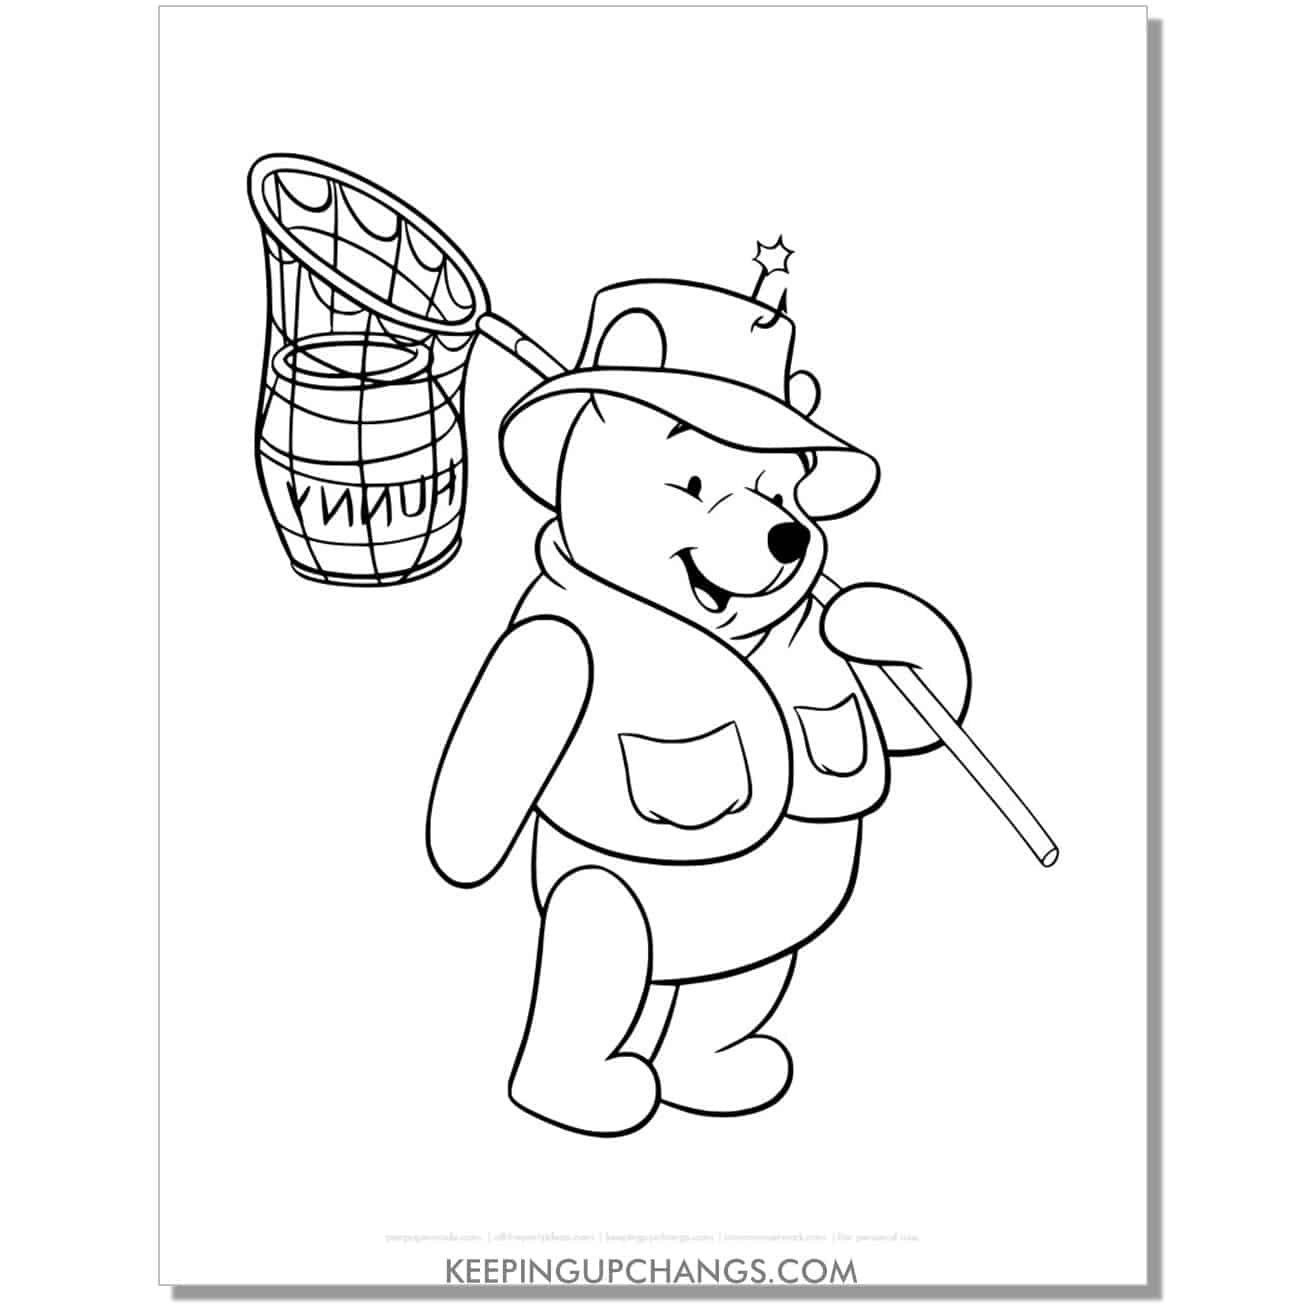 winnie the pooh with fish net and jar of honey coloring page, sheet.